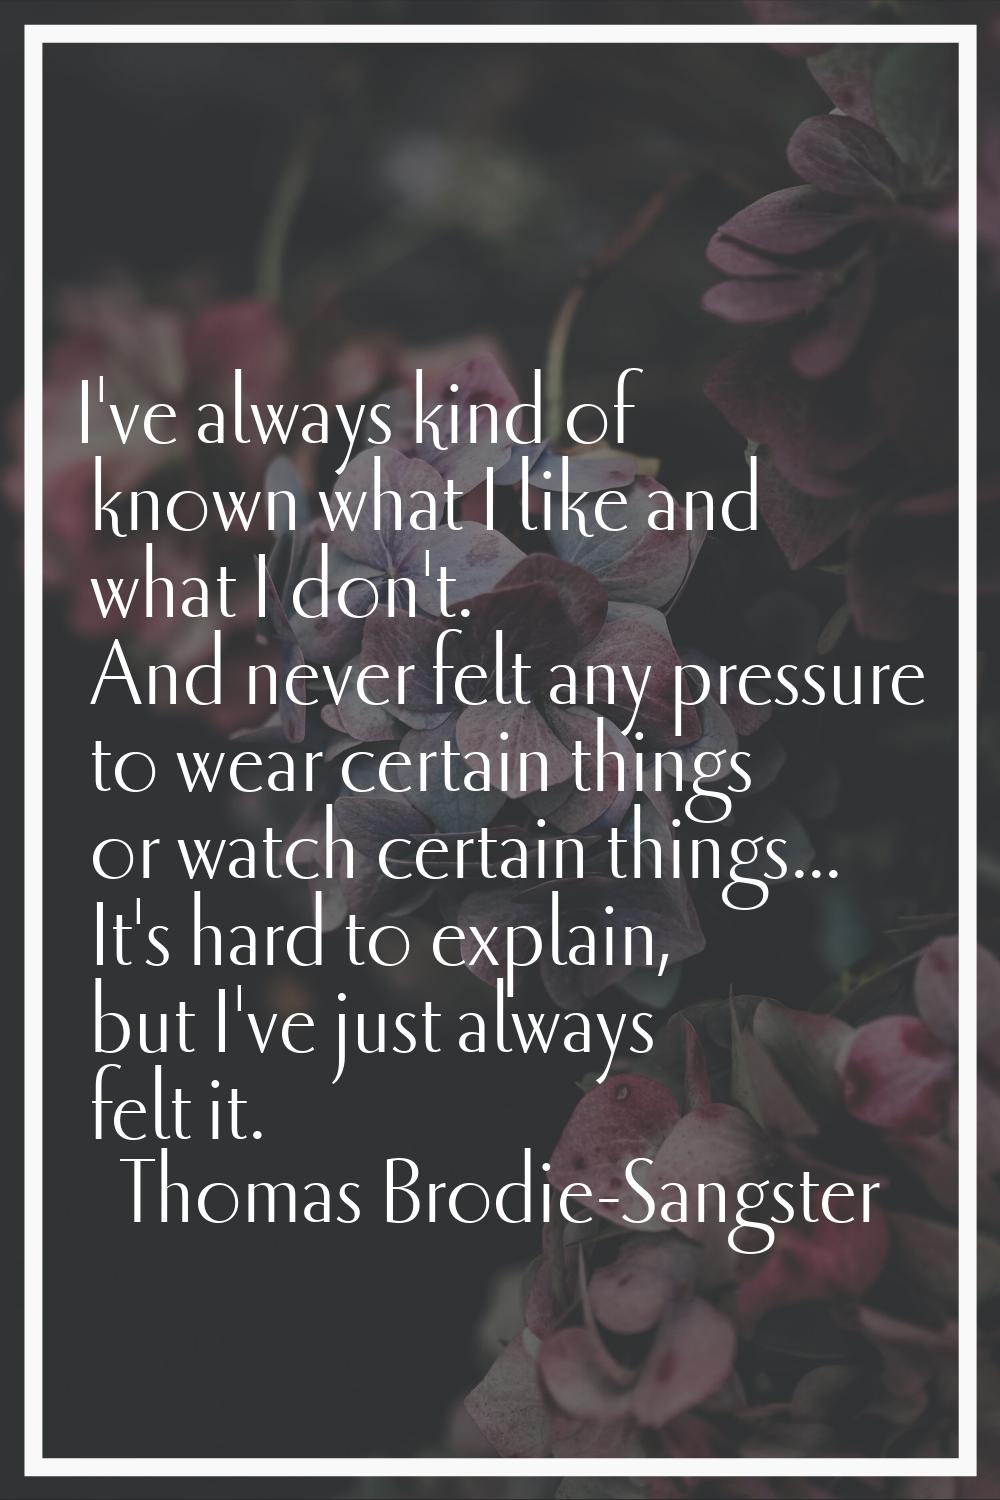 I've always kind of known what I like and what I don't. And never felt any pressure to wear certain